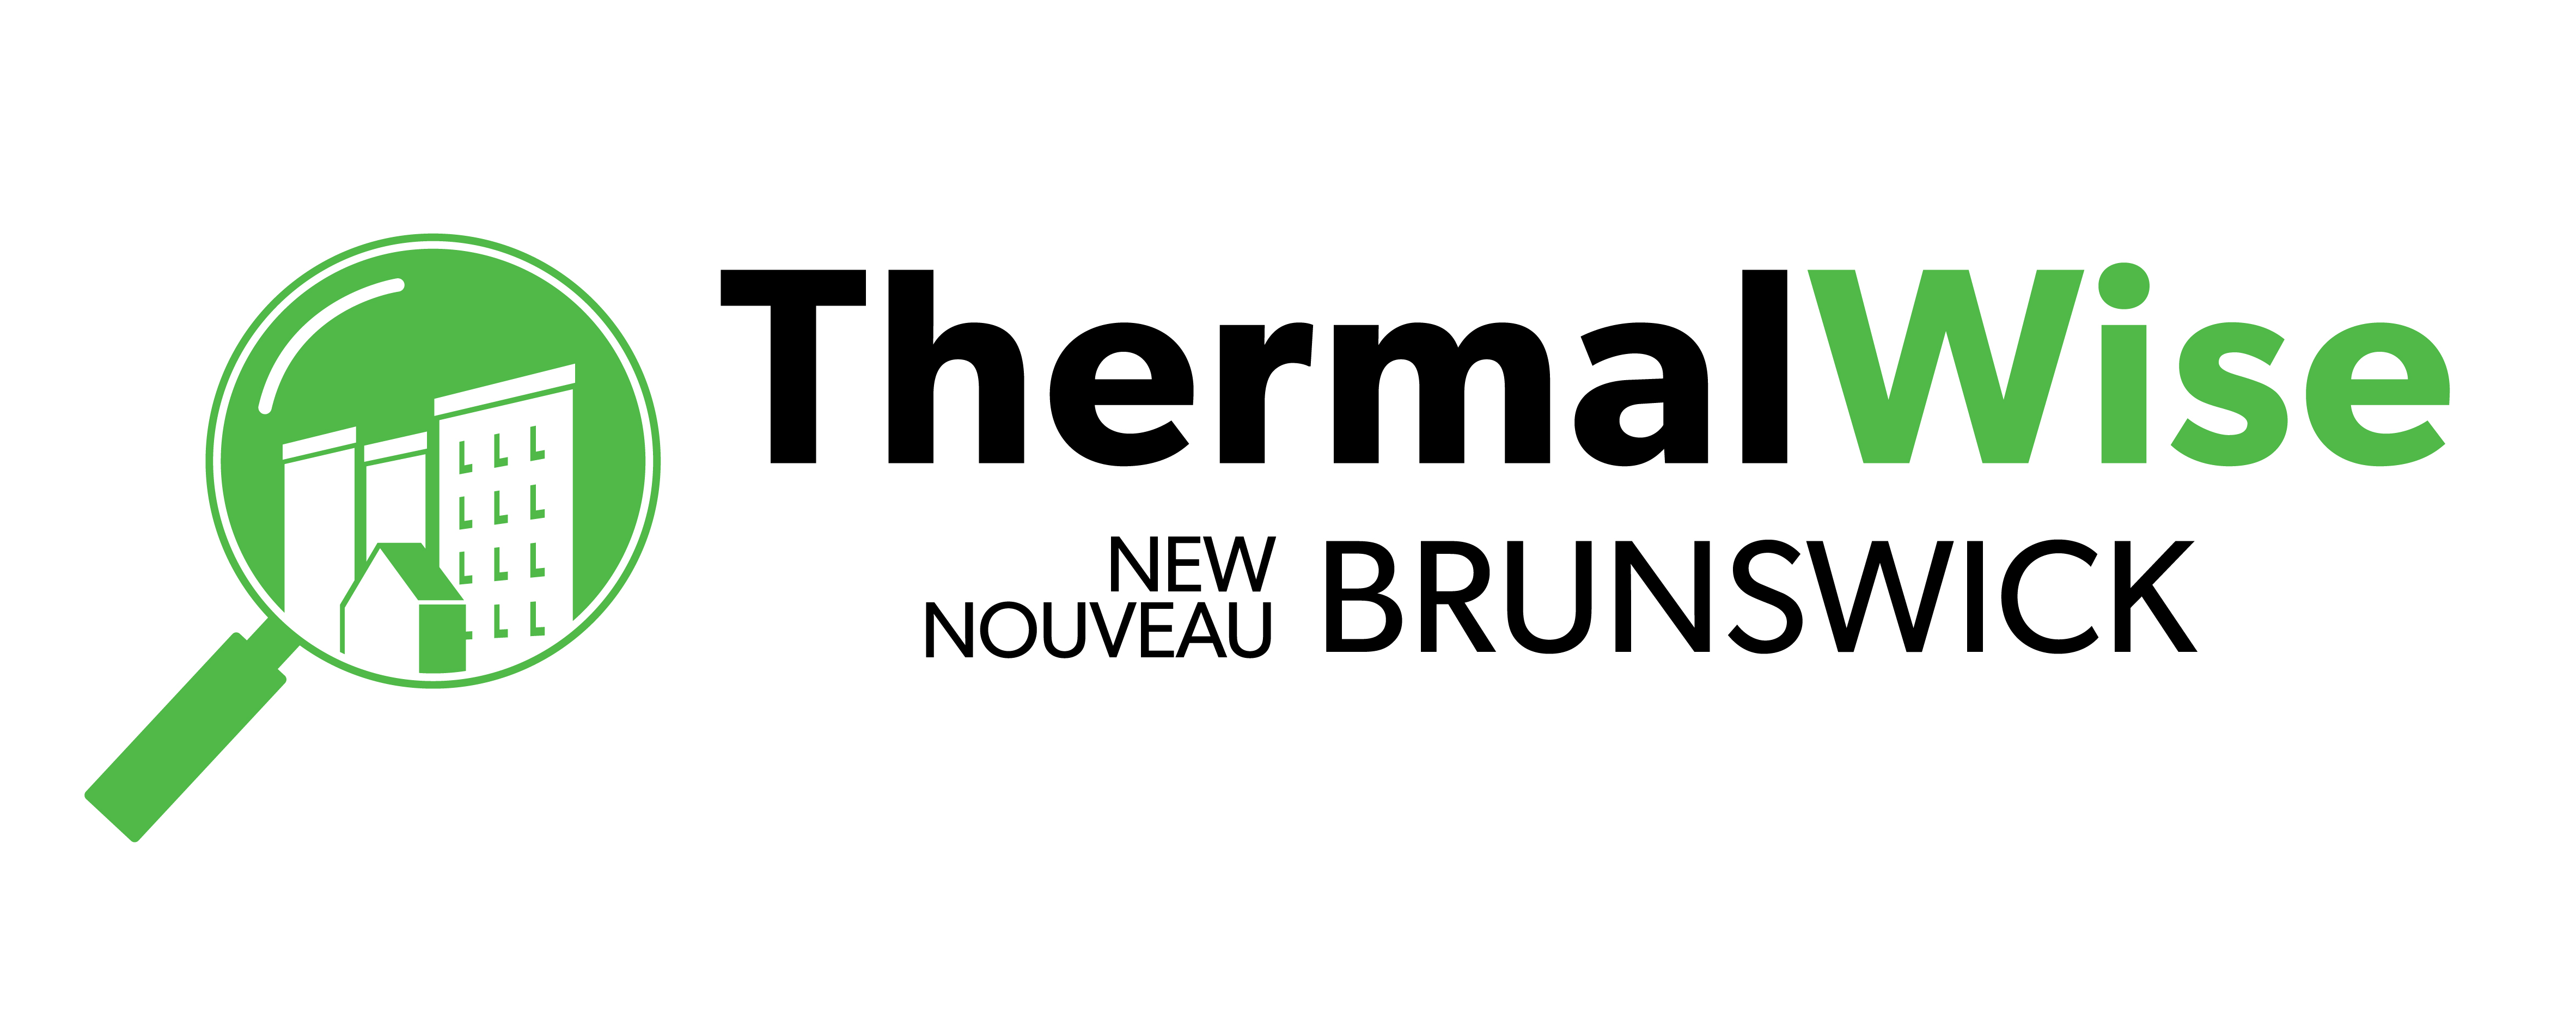 ThermalWise NB 1 844 454-0454